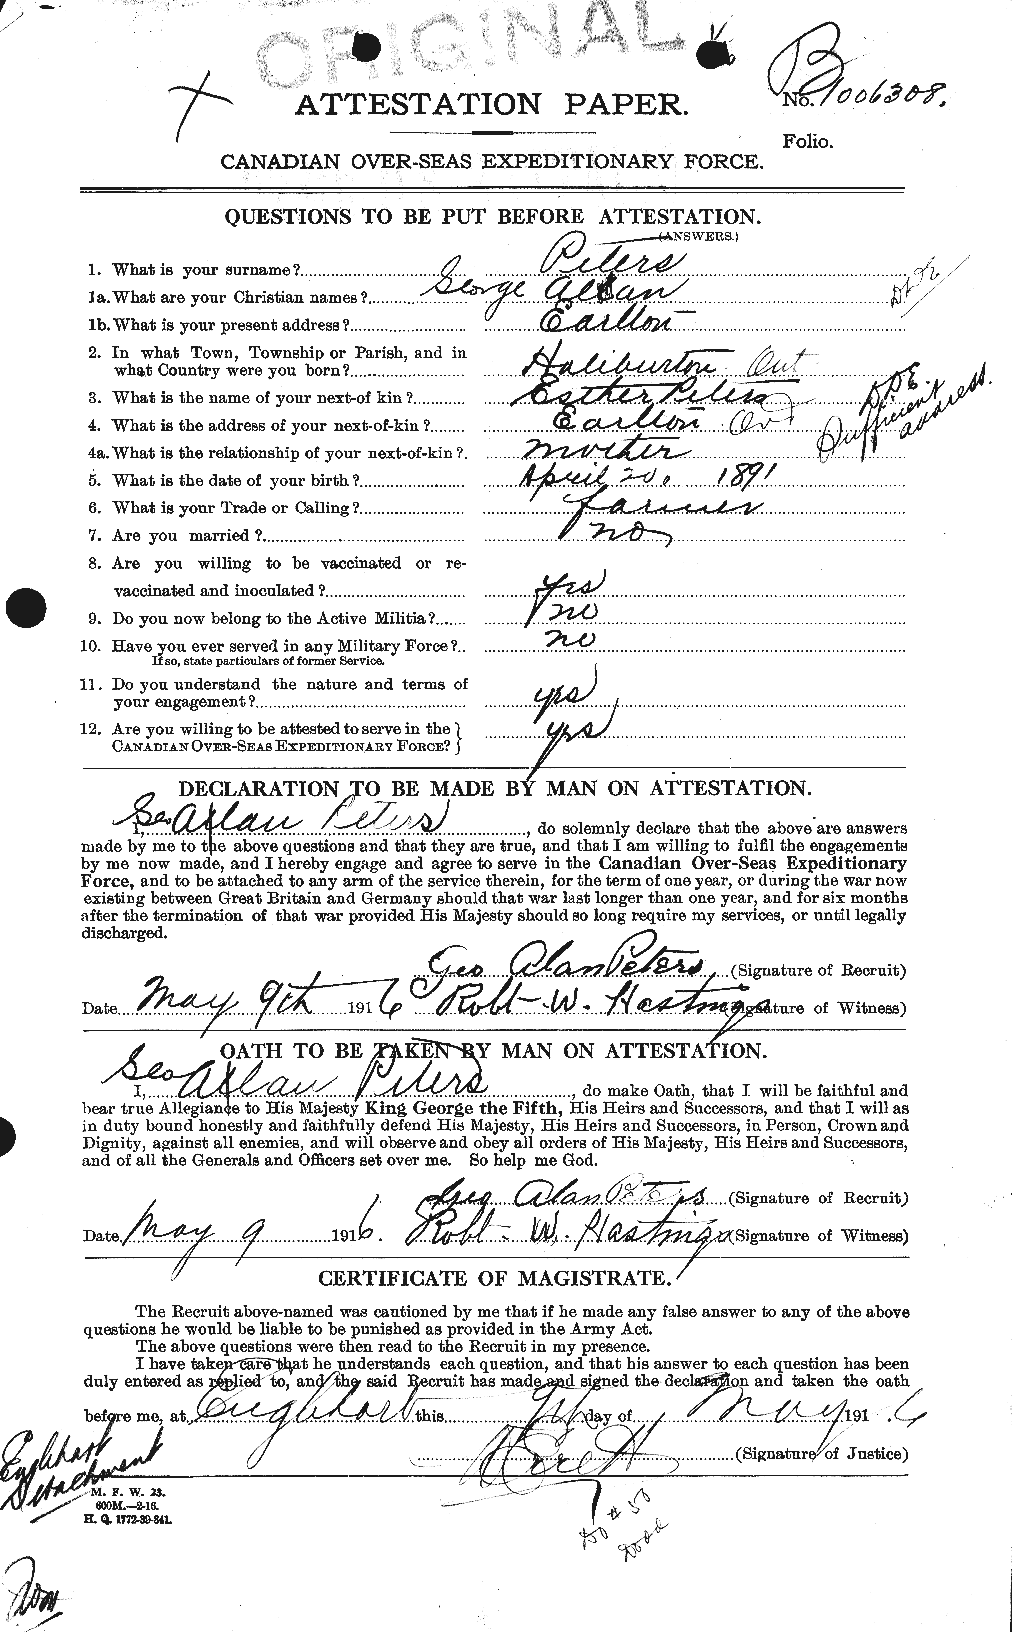 Personnel Records of the First World War - CEF 575454a